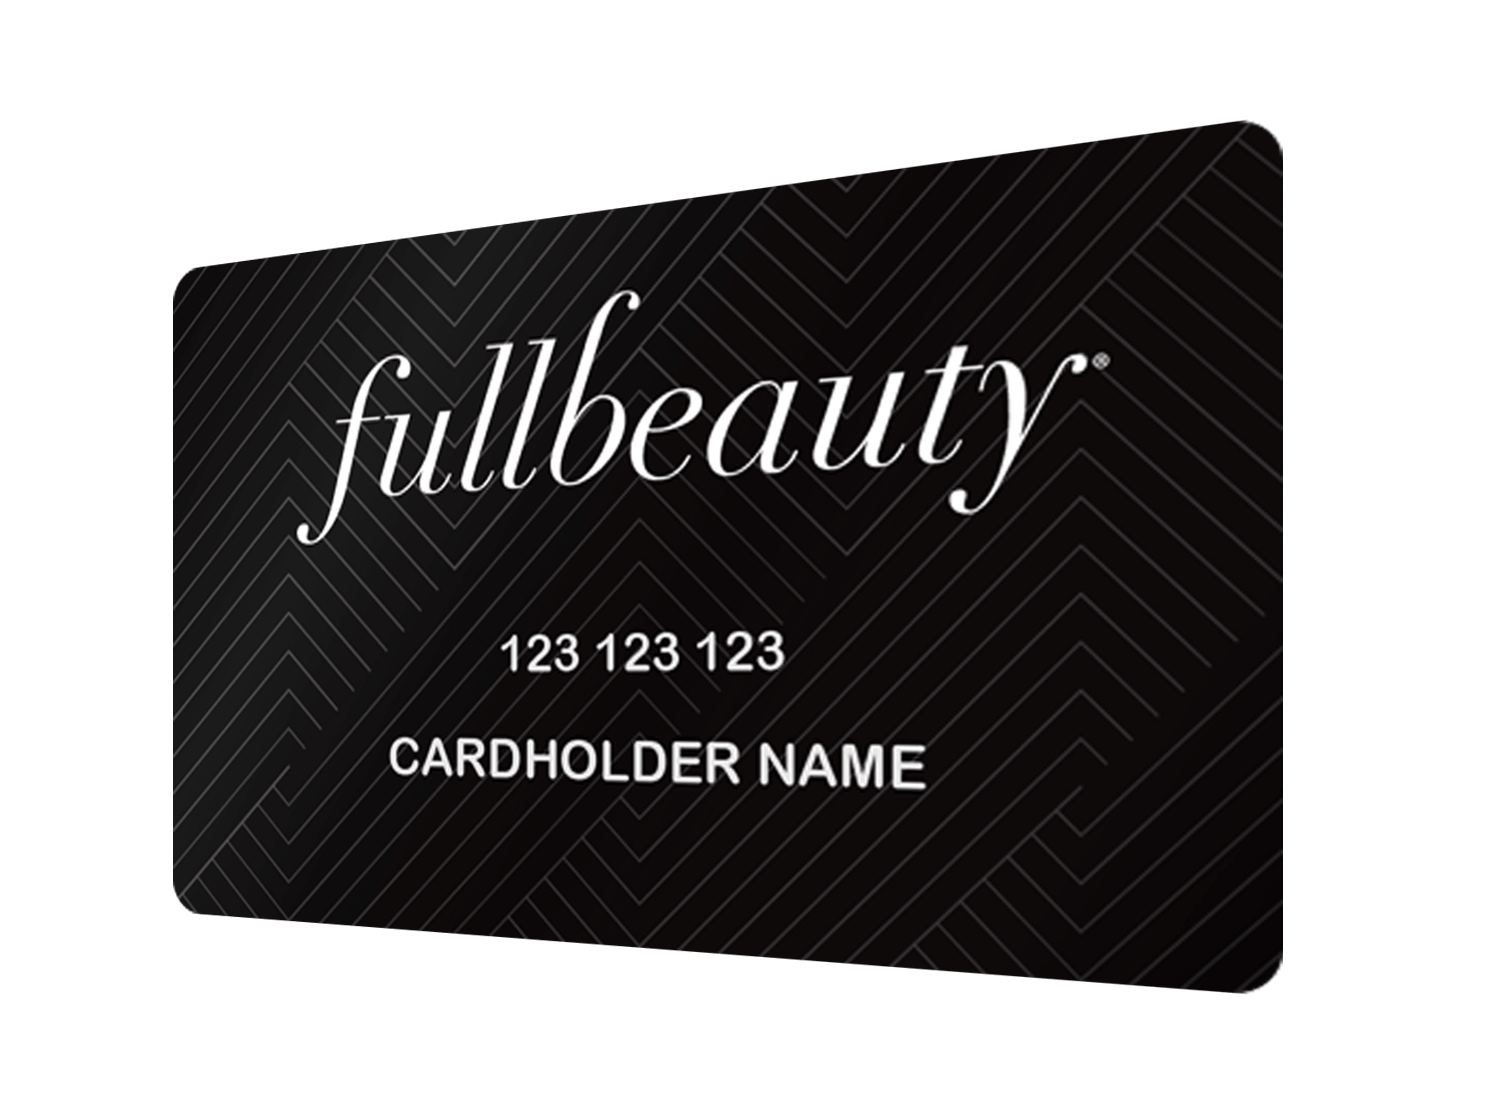 Credit Card  Fullbeauty Outlet